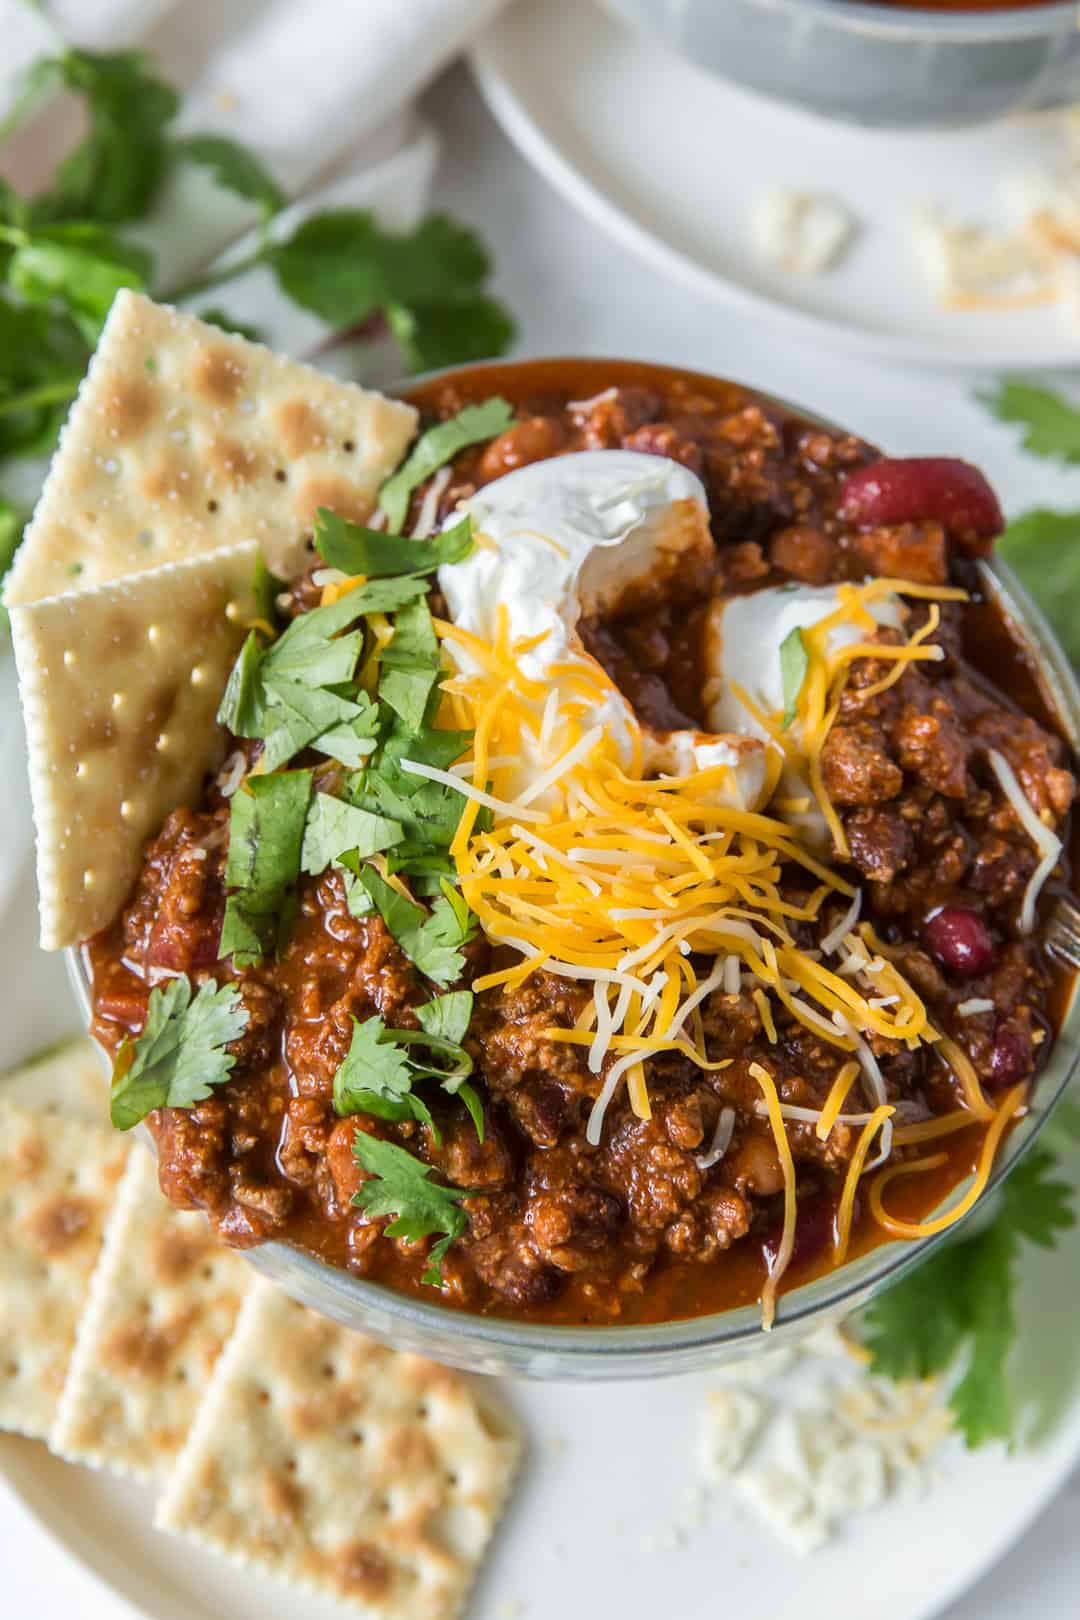 A bowl of beer chili with cheese, sour cream, and saltine crackers.